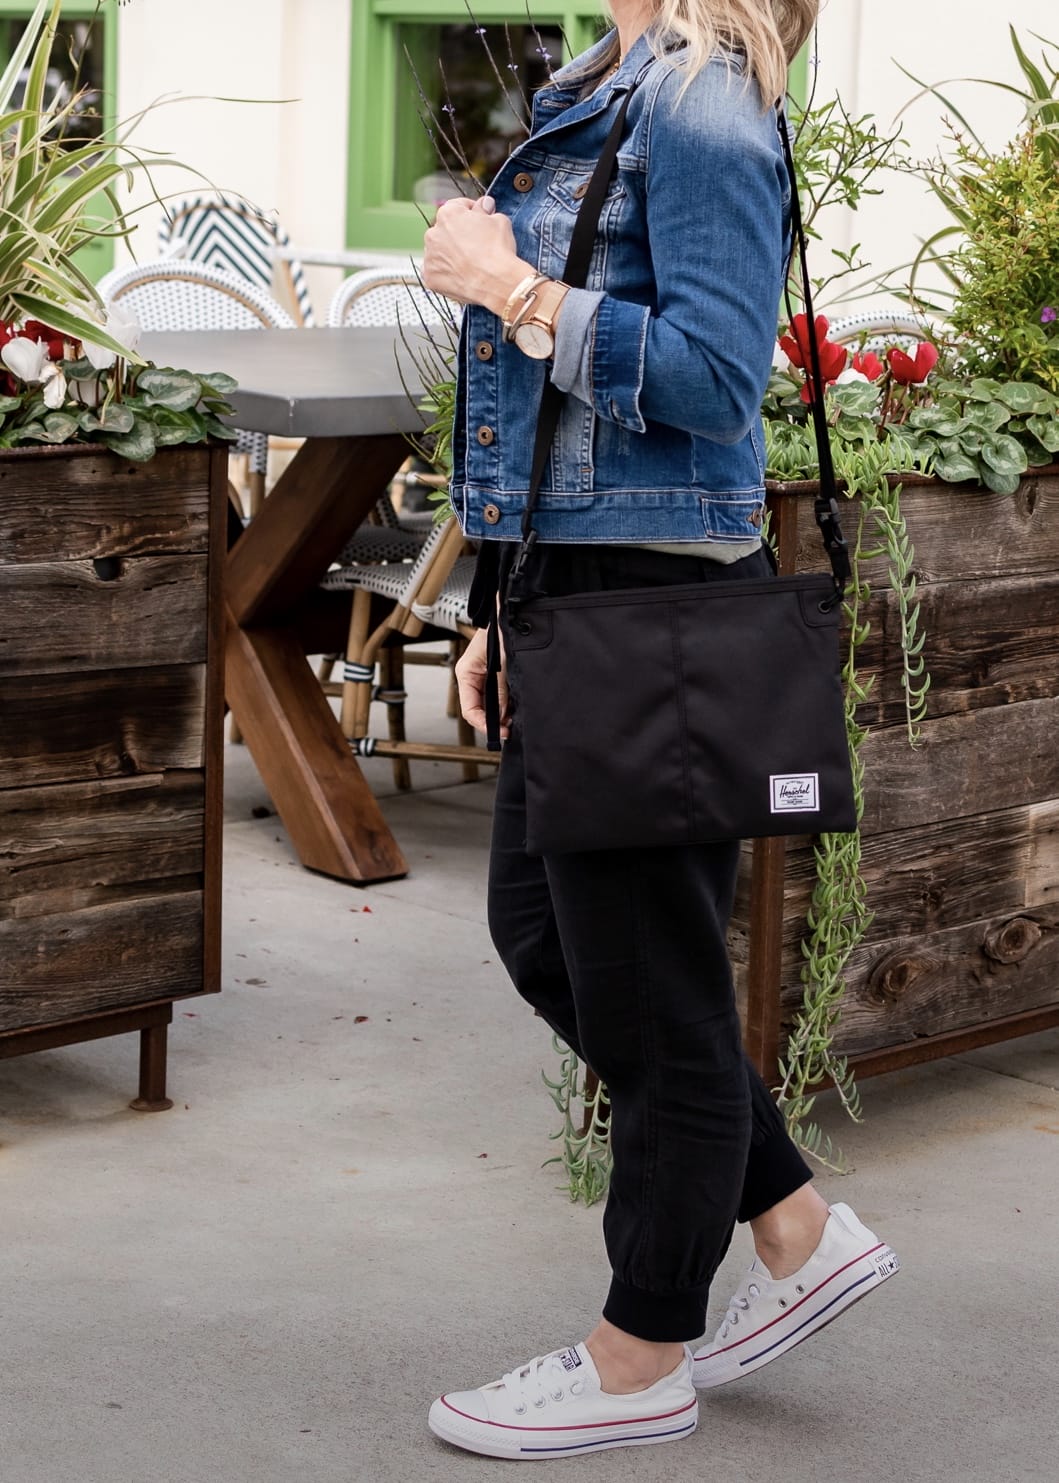 black joggers with tank top jean jacket and converse sneakers